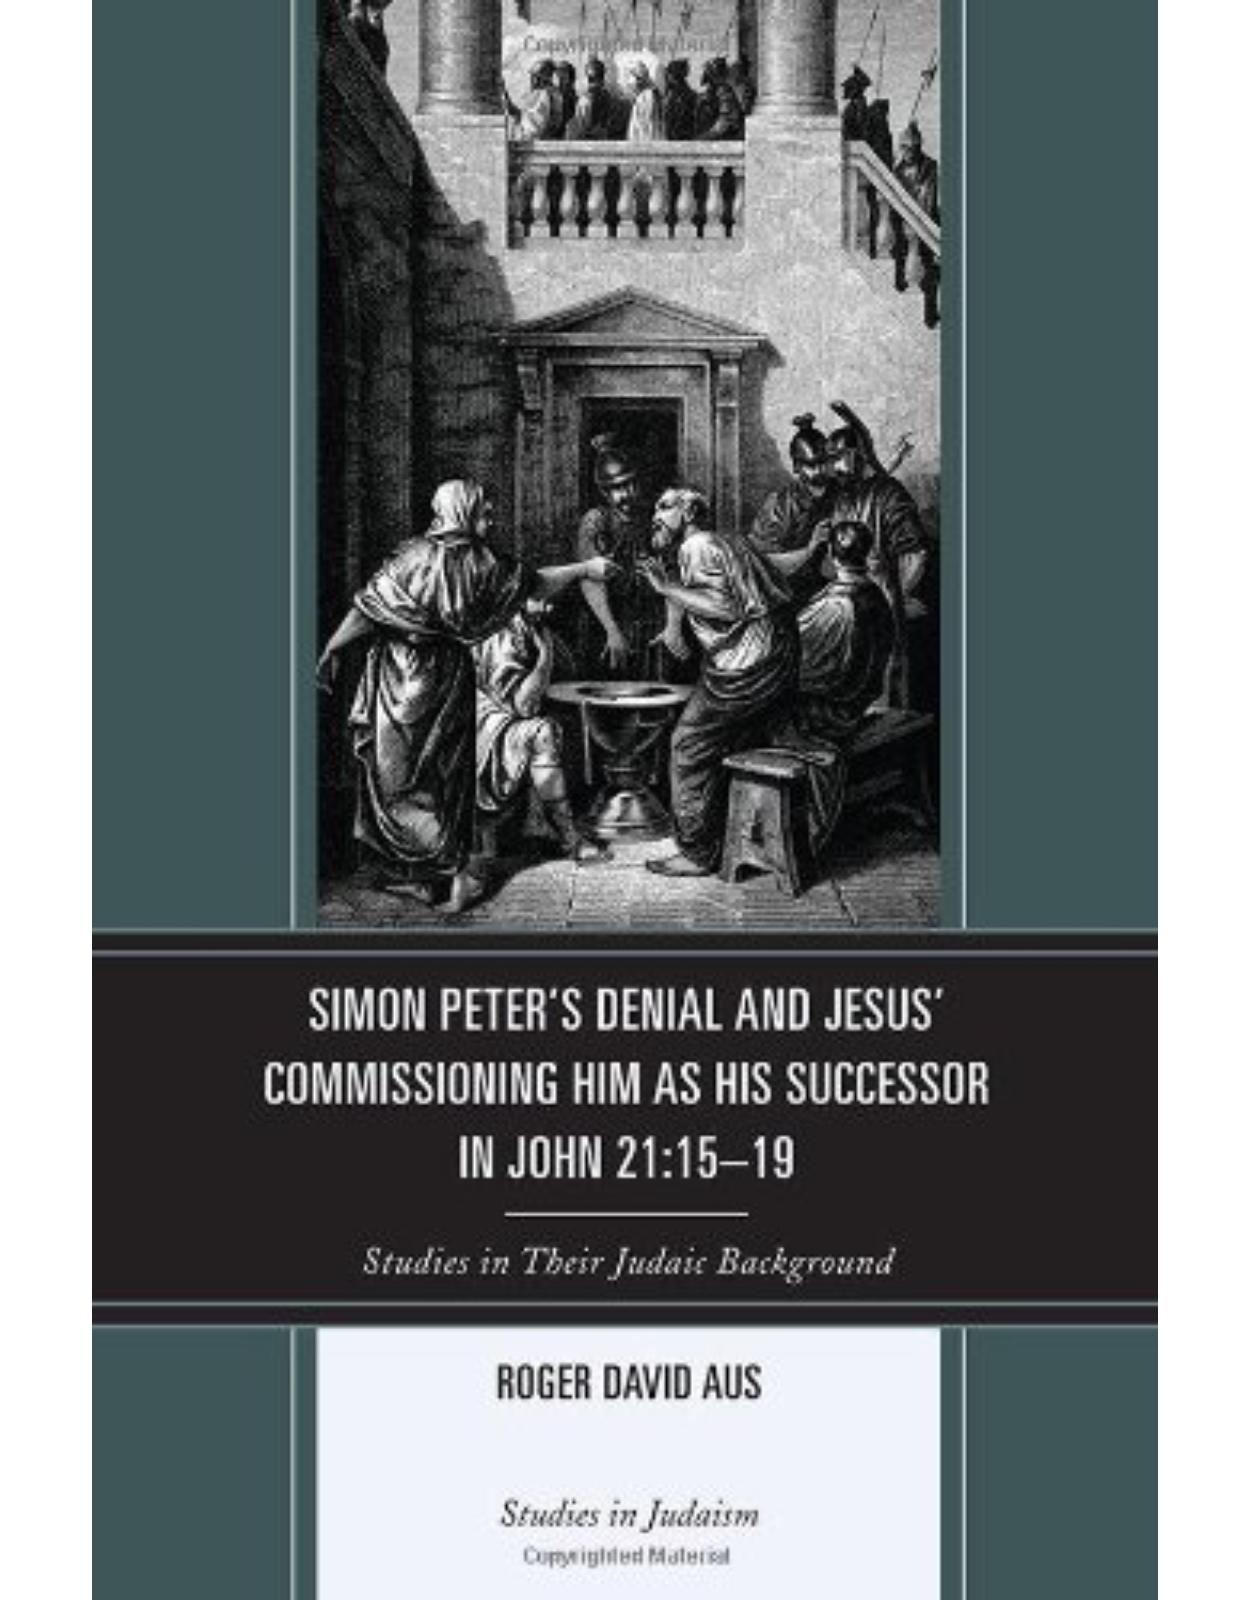 Simon Peter's Denial and Jesus' Commissioning Him as His Successor in John 21:15-19: Studies in Their Judaic Background